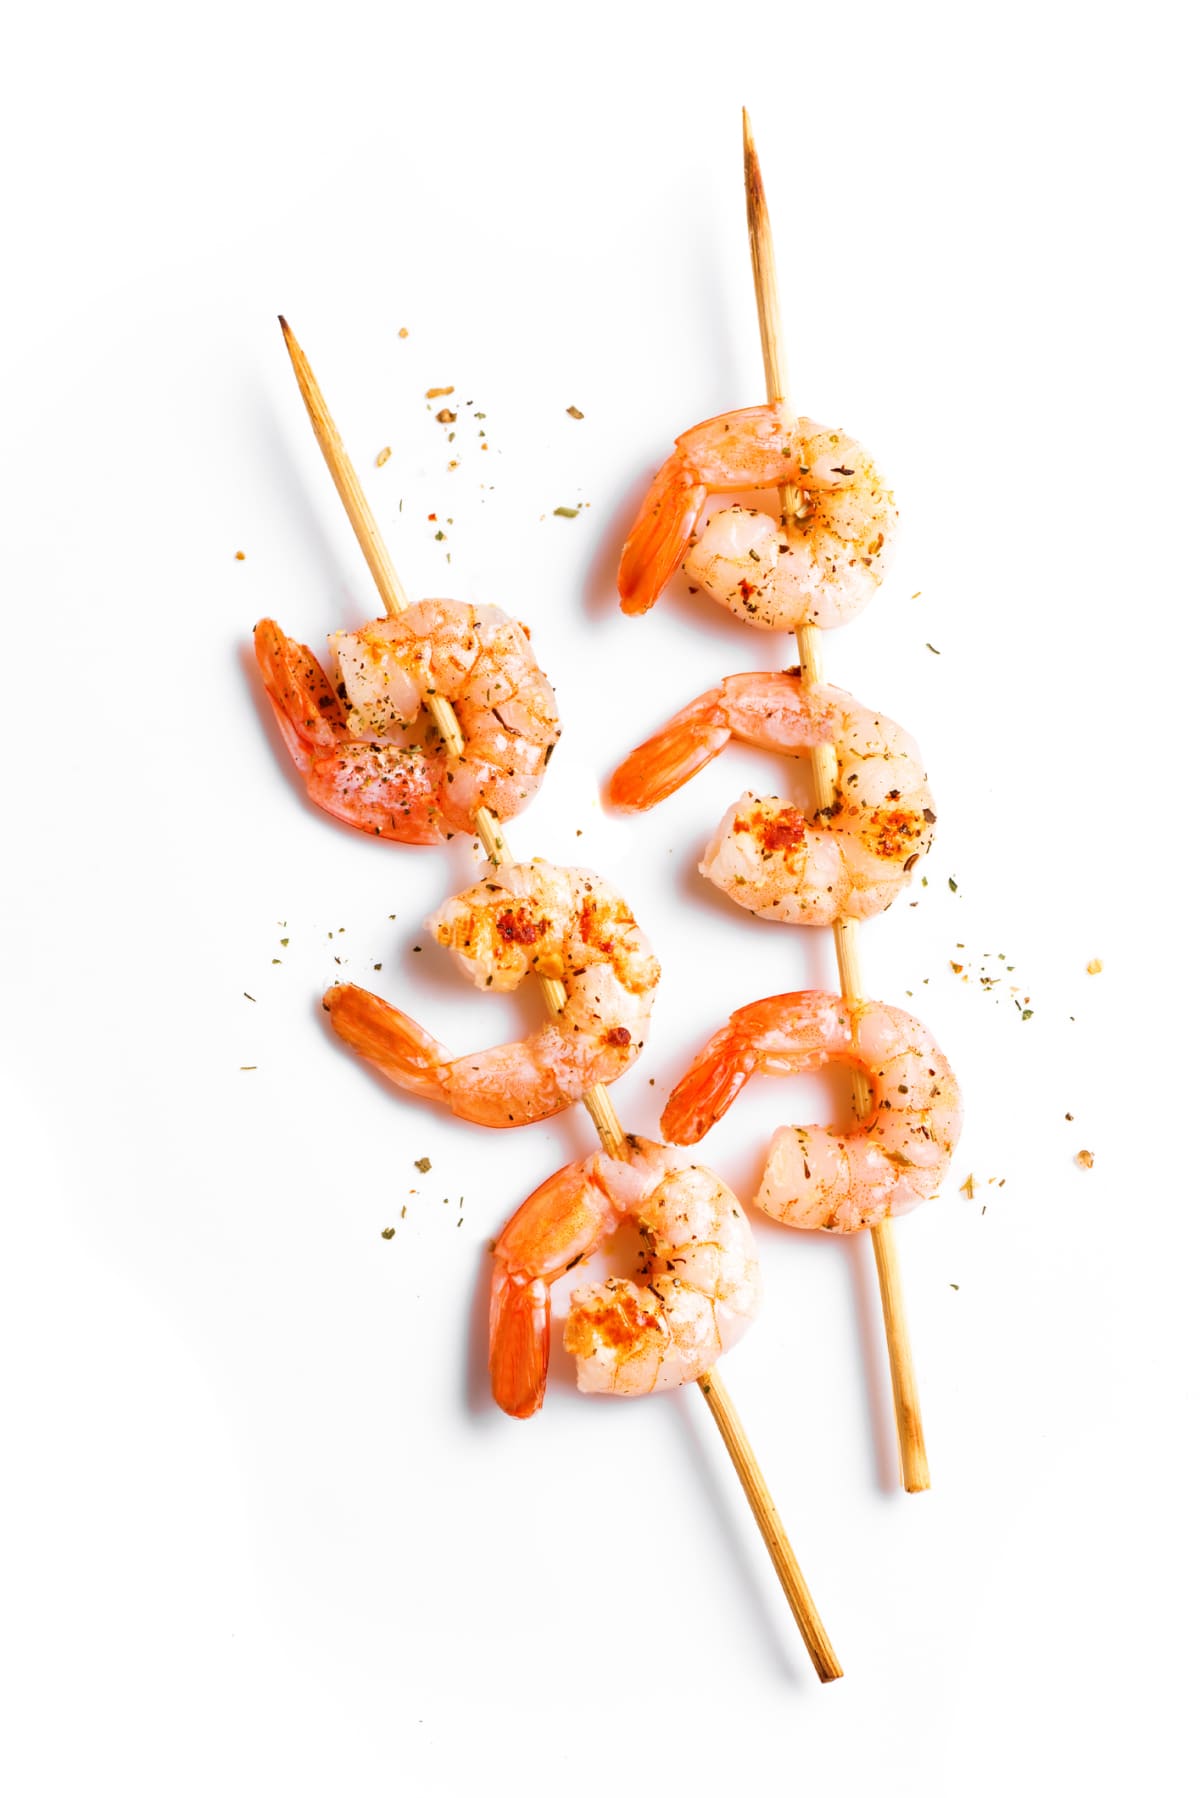 Grilled Shrimp Skewers isolated on white background. Fried spicy prawn seafood on sticks, design element.